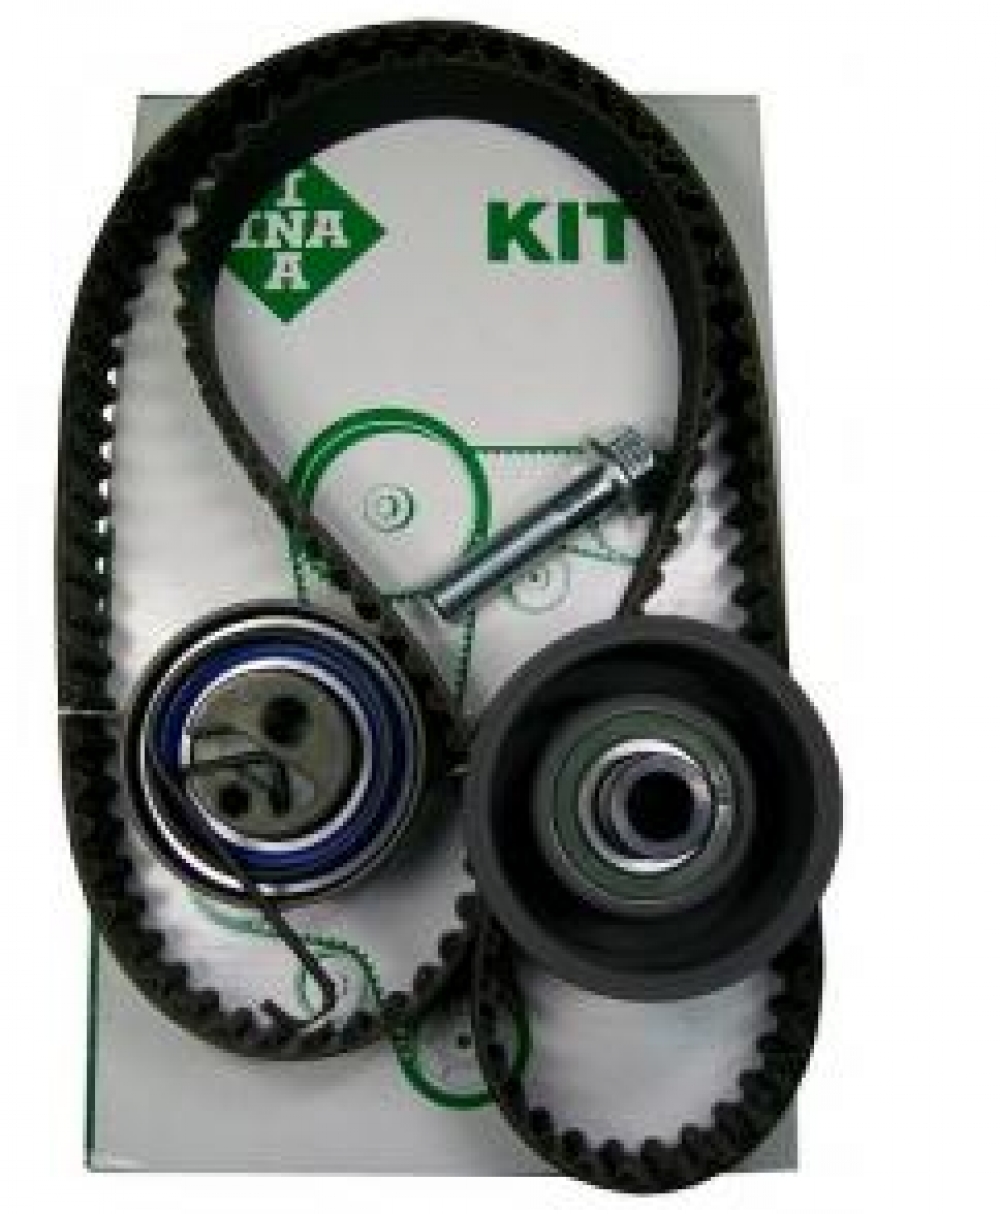 Kit distributie Opel Astra G Y17DT INA Pagina 2/opel-corsa-c/opel-agila/opel-corsa-d - Kit distributie Opel Astra G